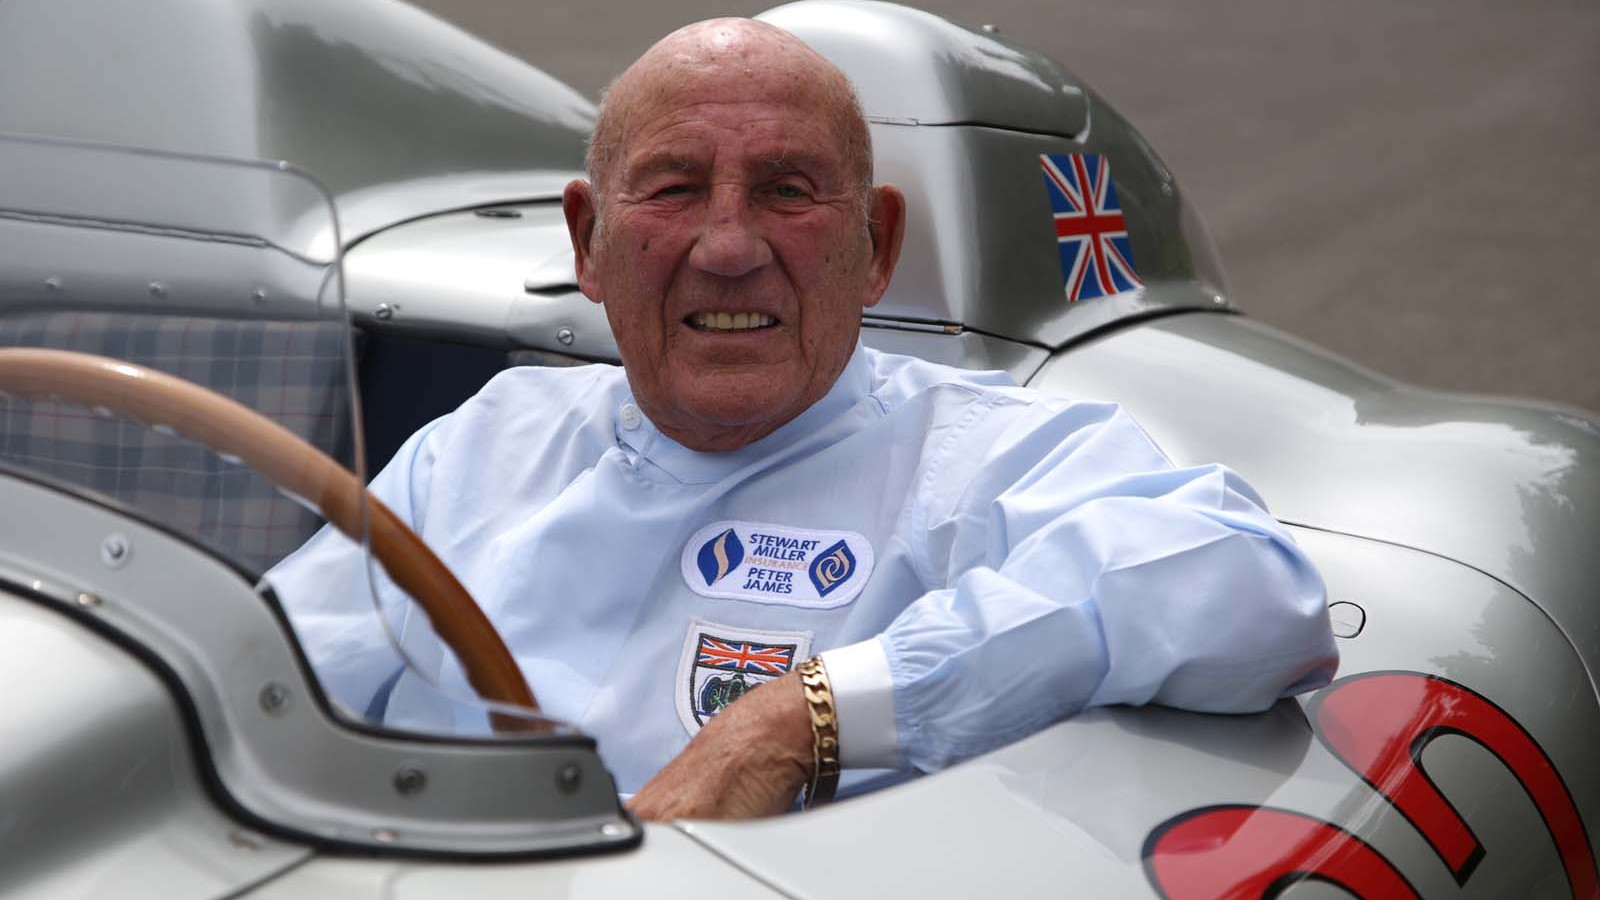 Sir Stirling Moss at the wheel of the 300 SLR